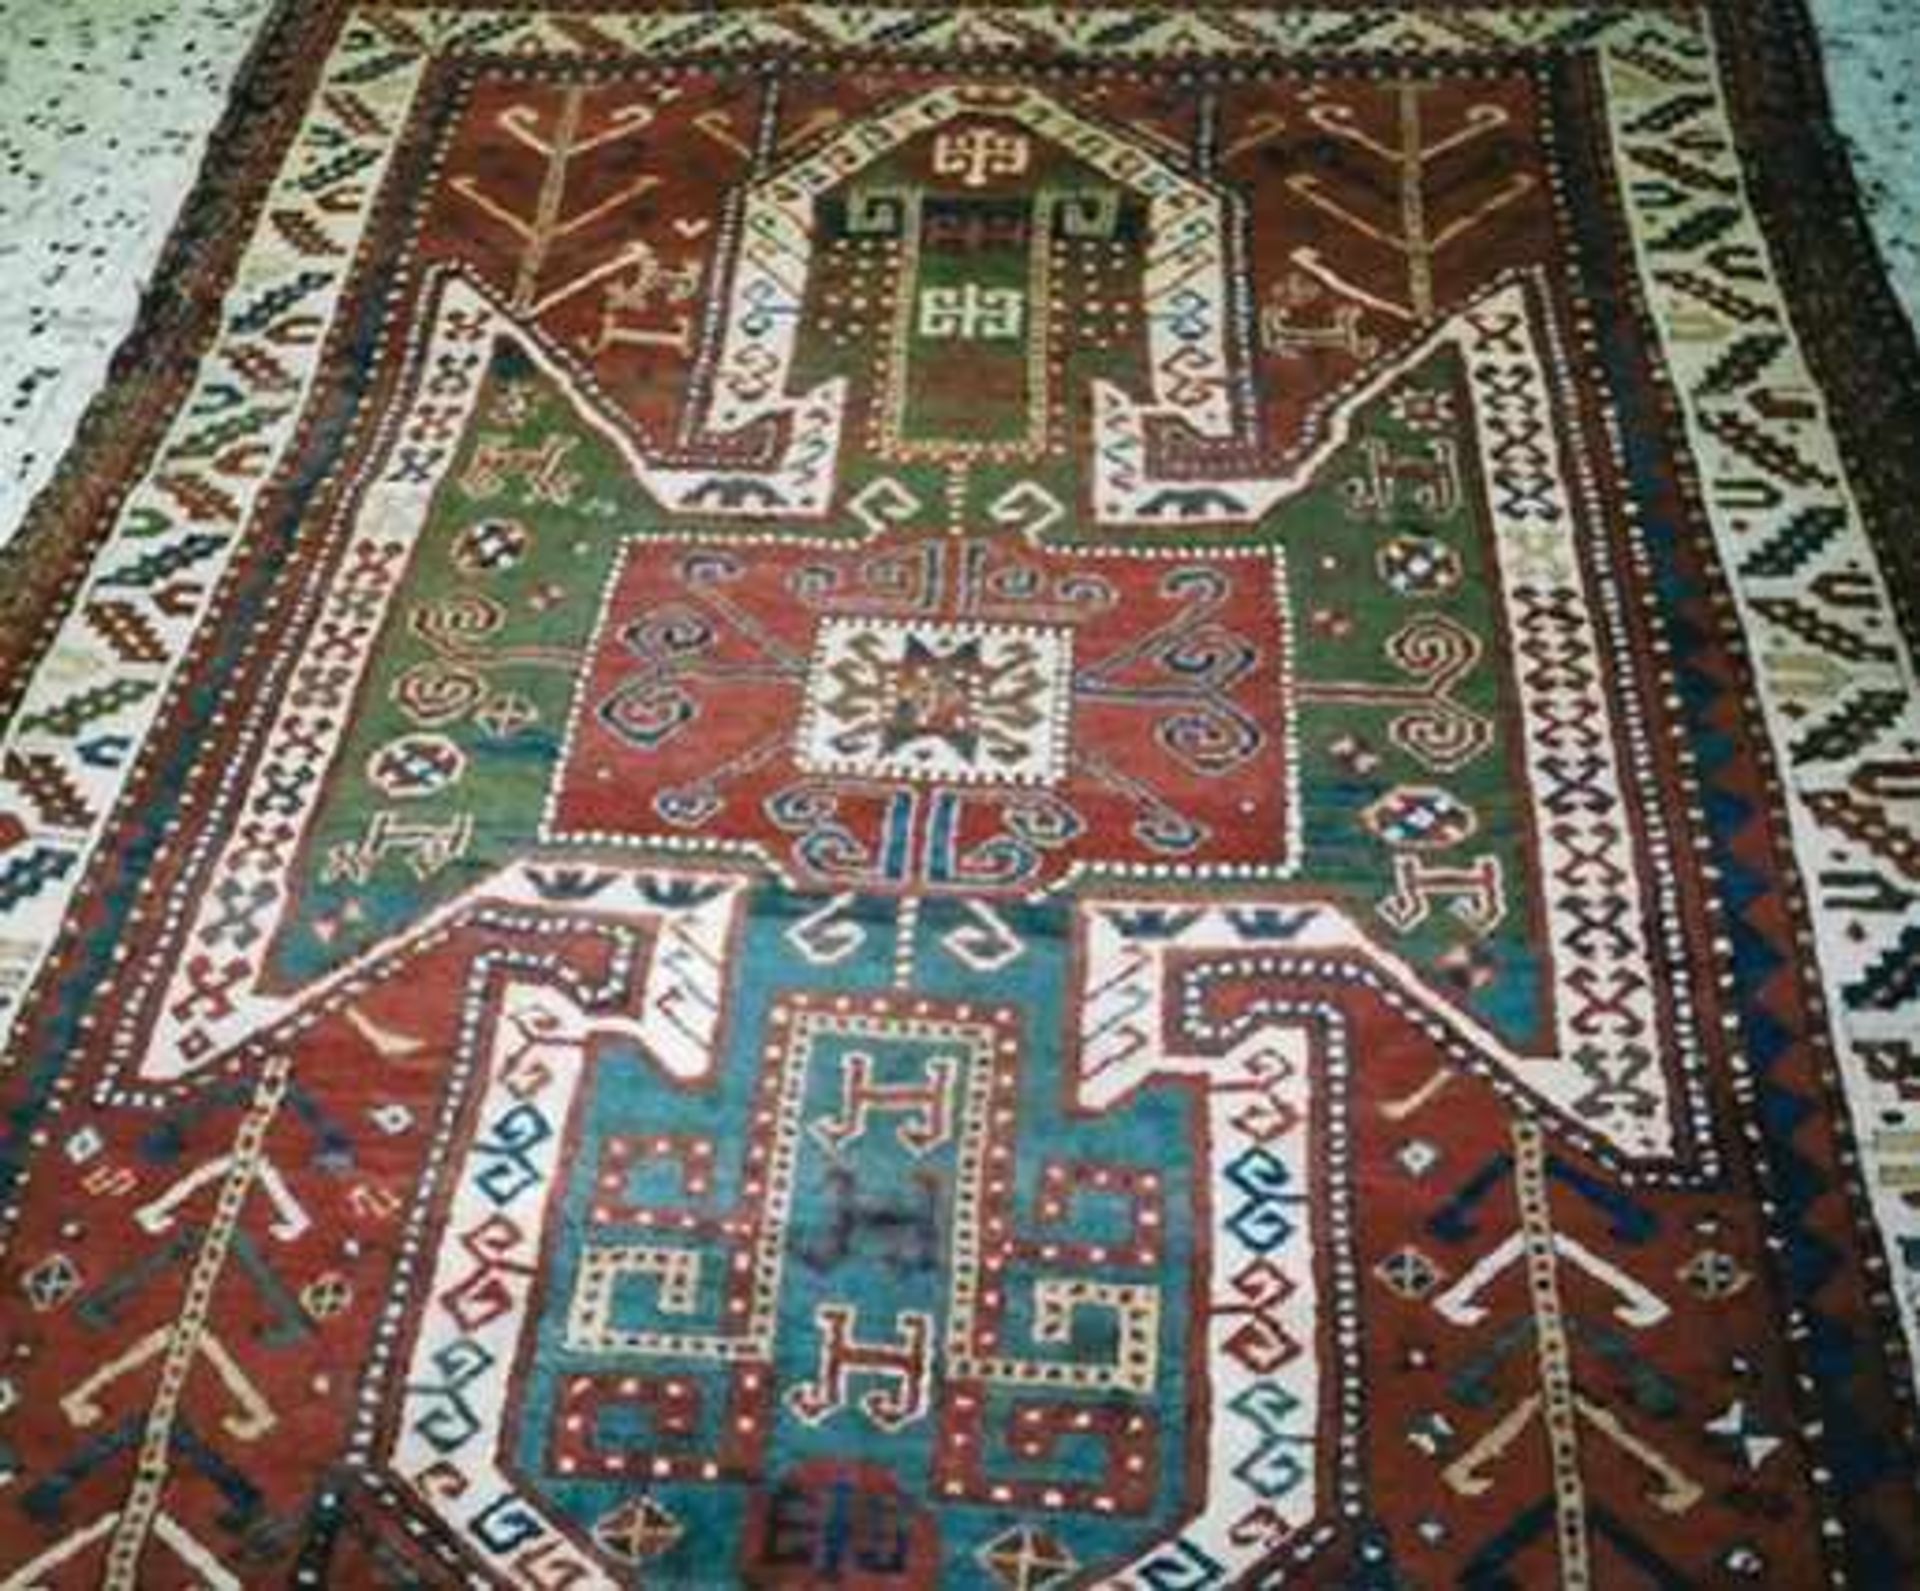 Sewan Kazak, antique carpet from end of 19th century AD, in very good condition. Huge geometrical